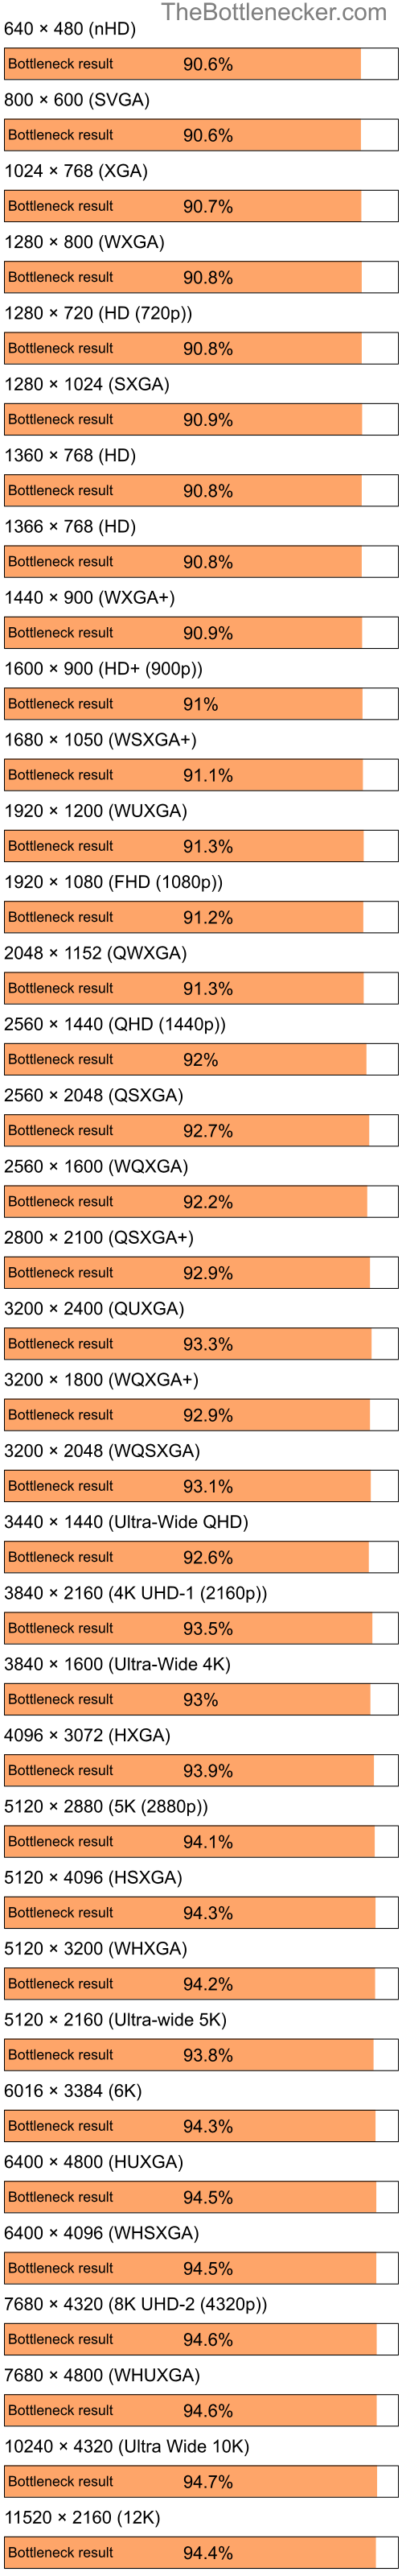 Bottleneck results by resolution for Intel Celeron M 410 and NVIDIA MX 400 in7 Days to Die